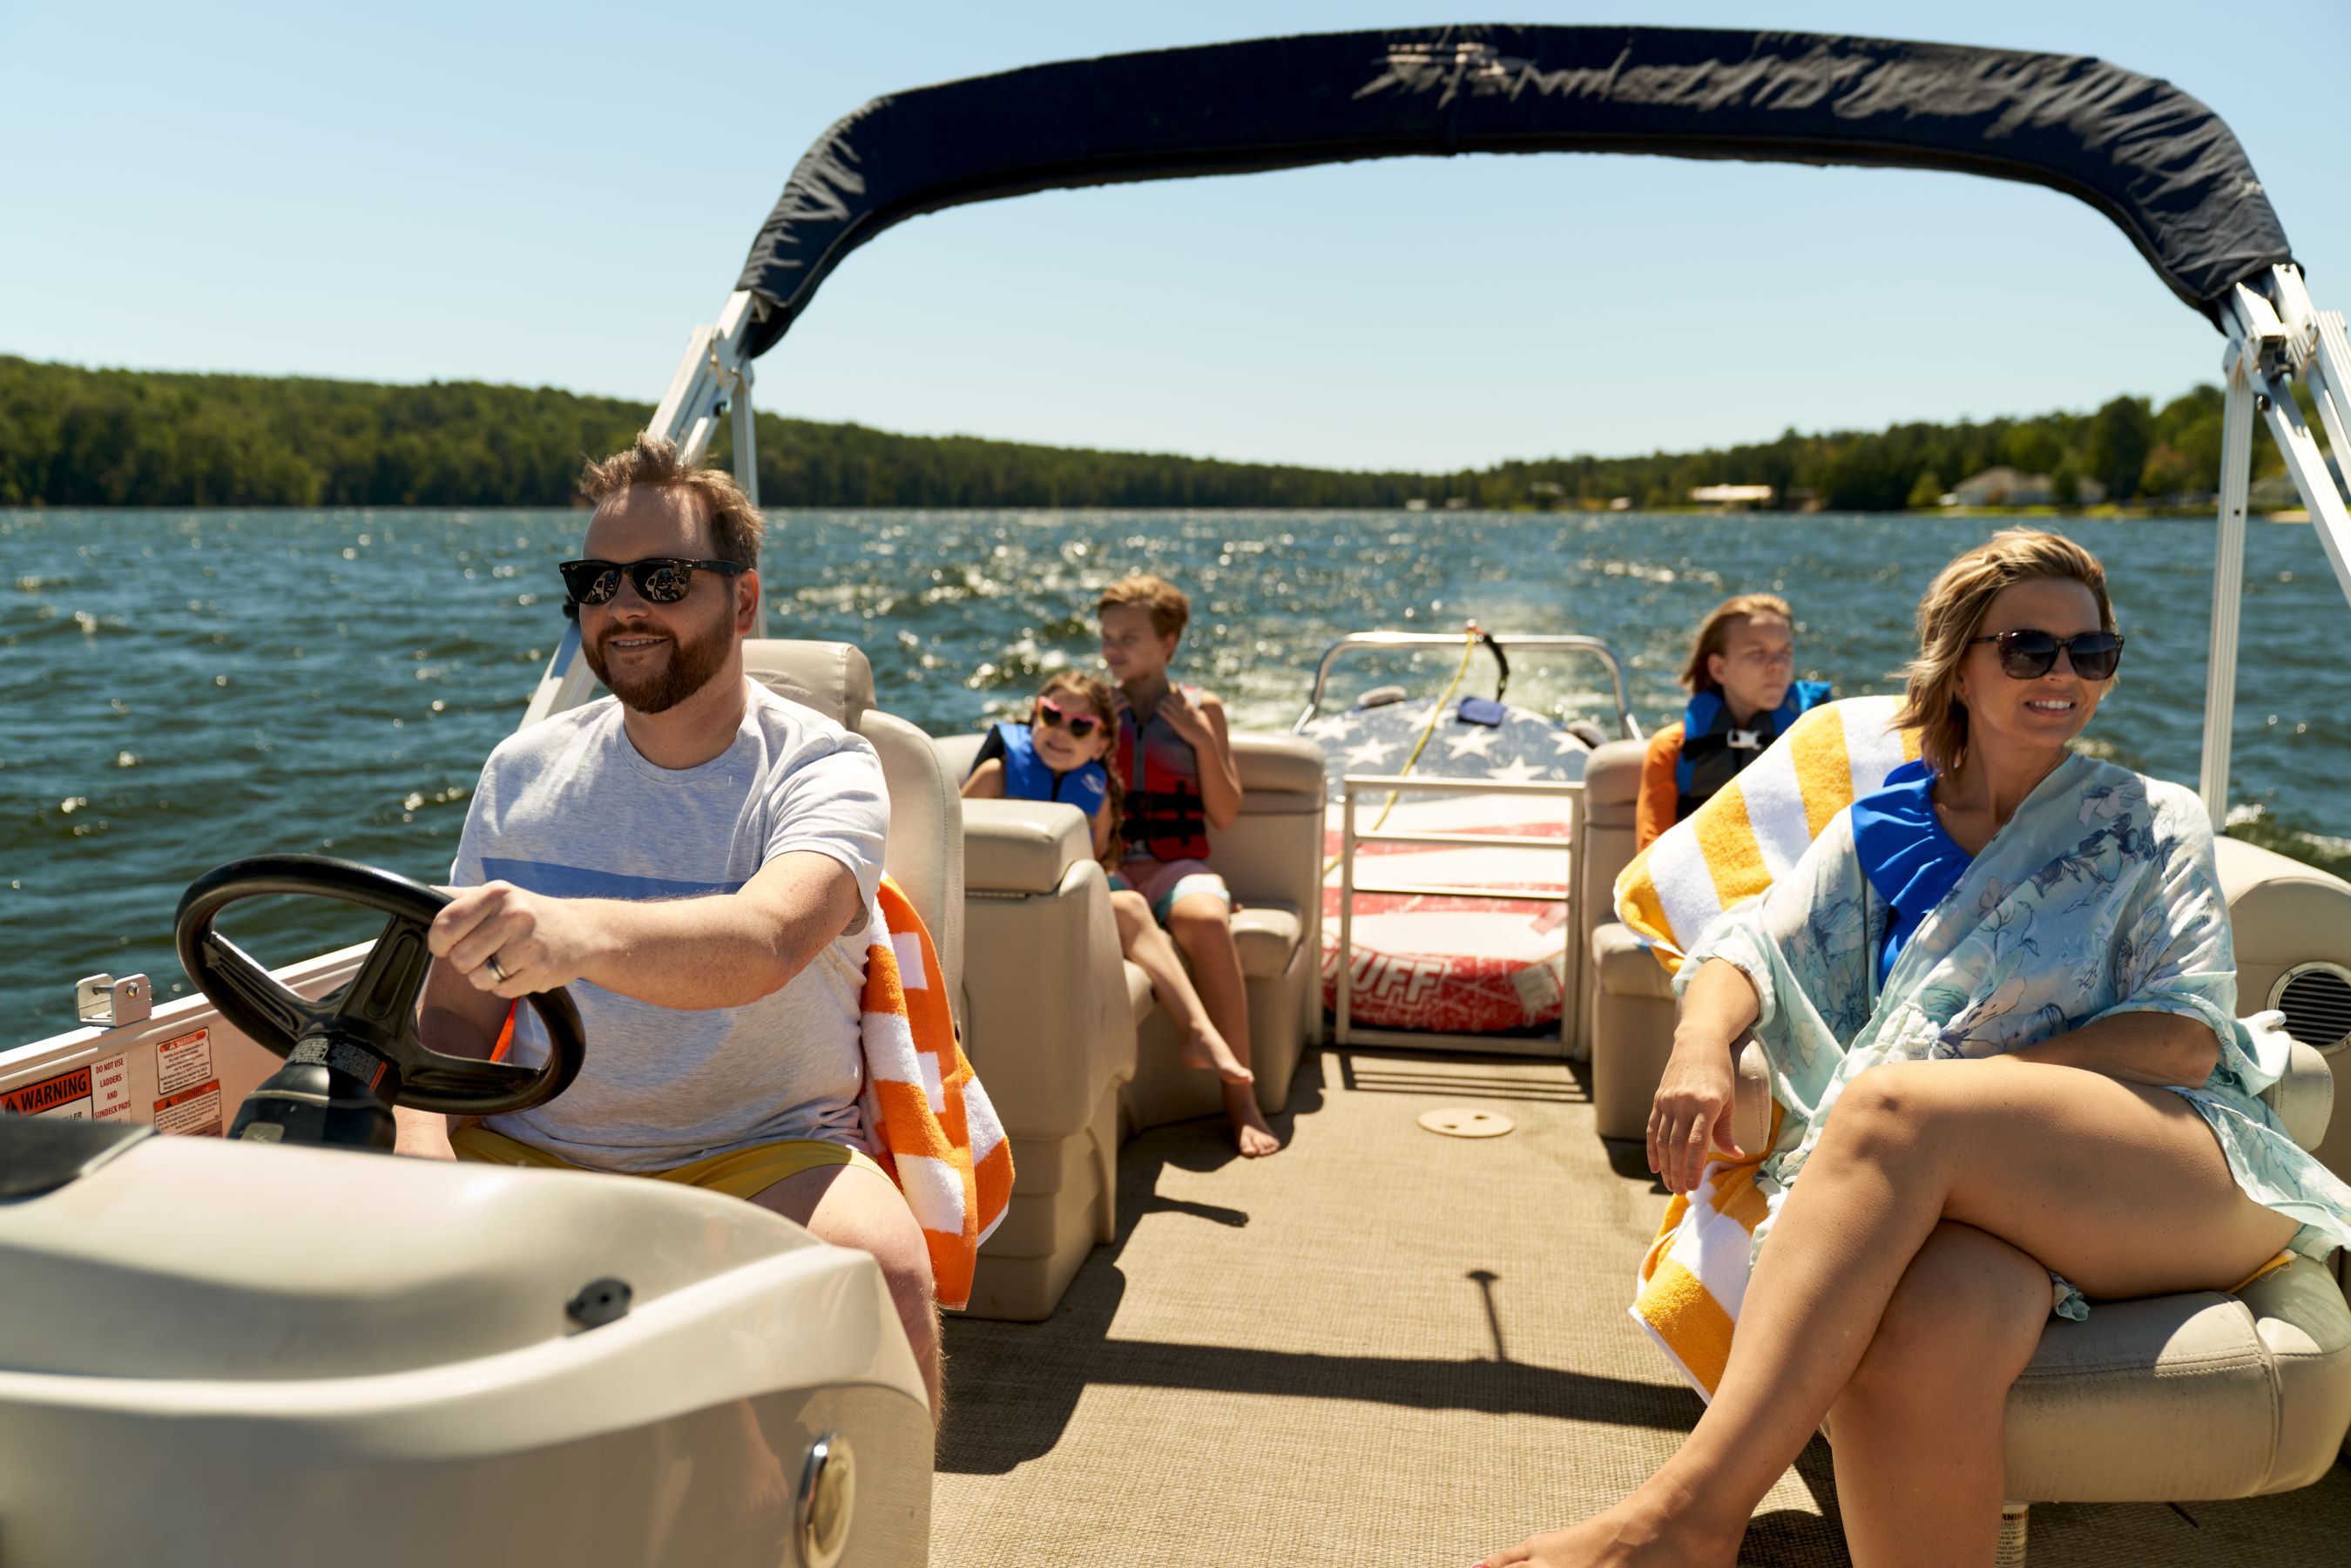 Follow these tips and other measures to ensure a safe boating experience on the water this summer for you and your family.